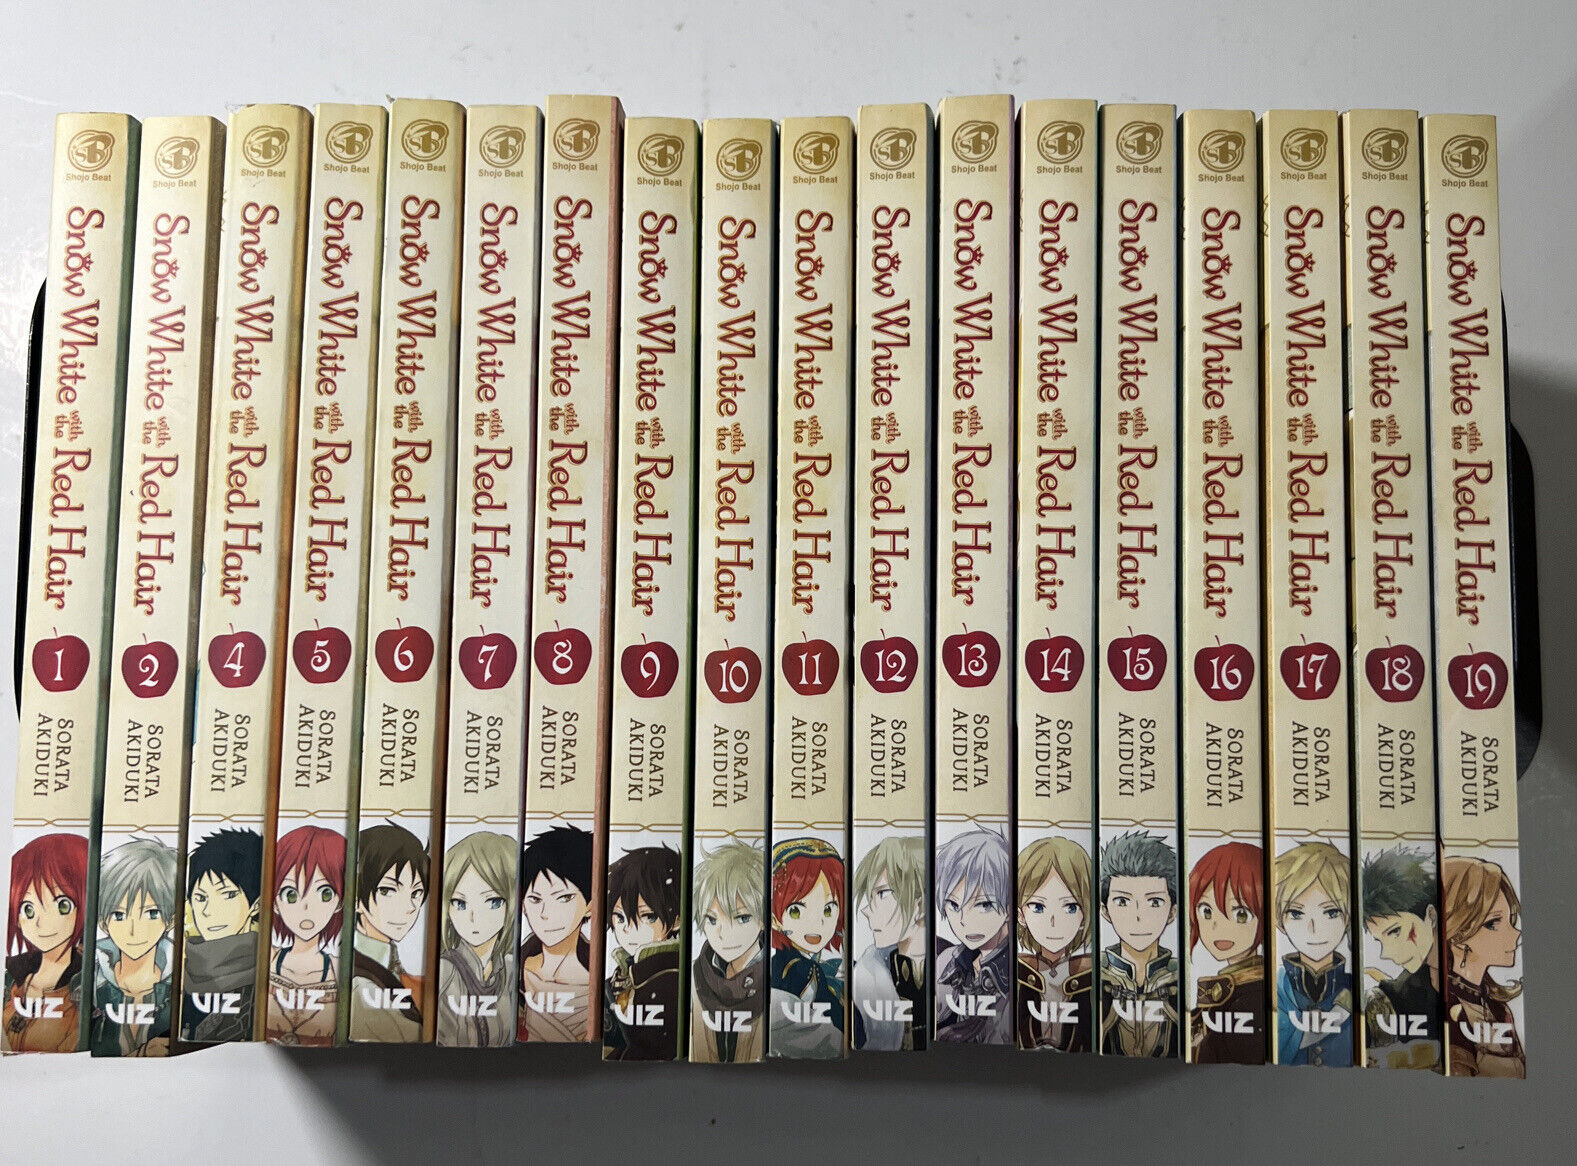 Snow White With The Red Hair 1,2, 4-19Manga Eng New (18 Books)